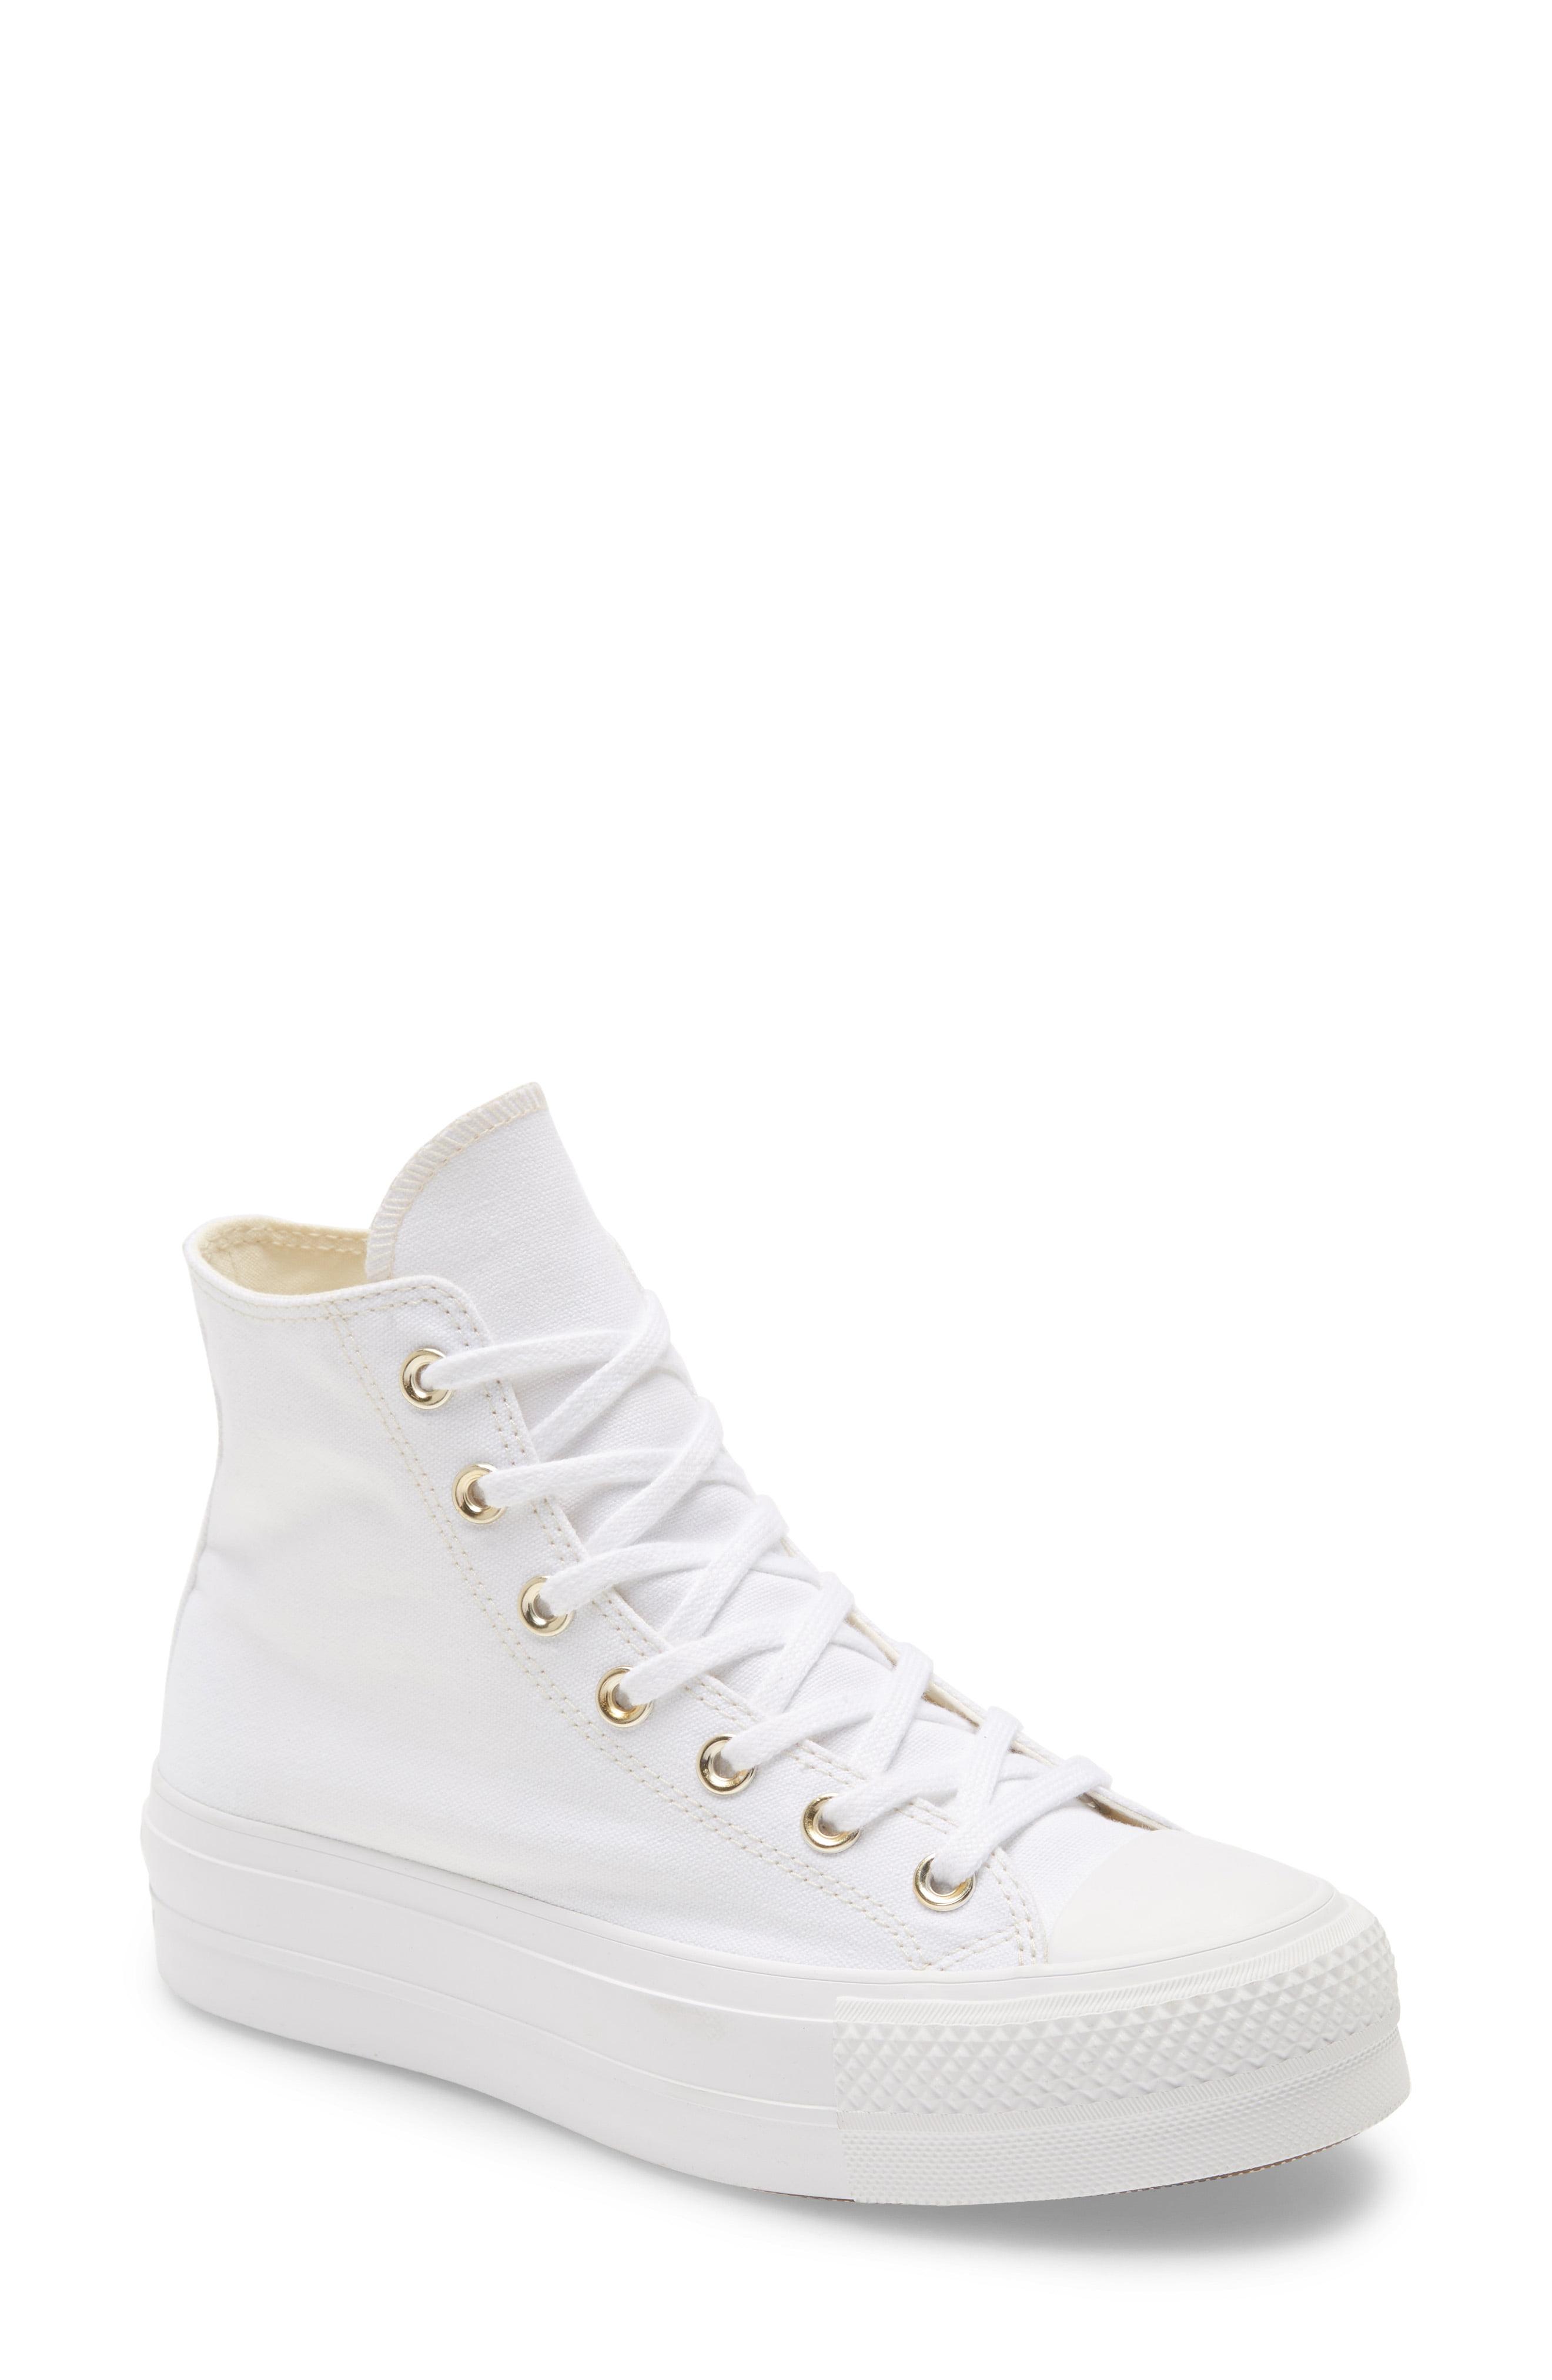 converse white chuck taylor all star lift platform sneakers